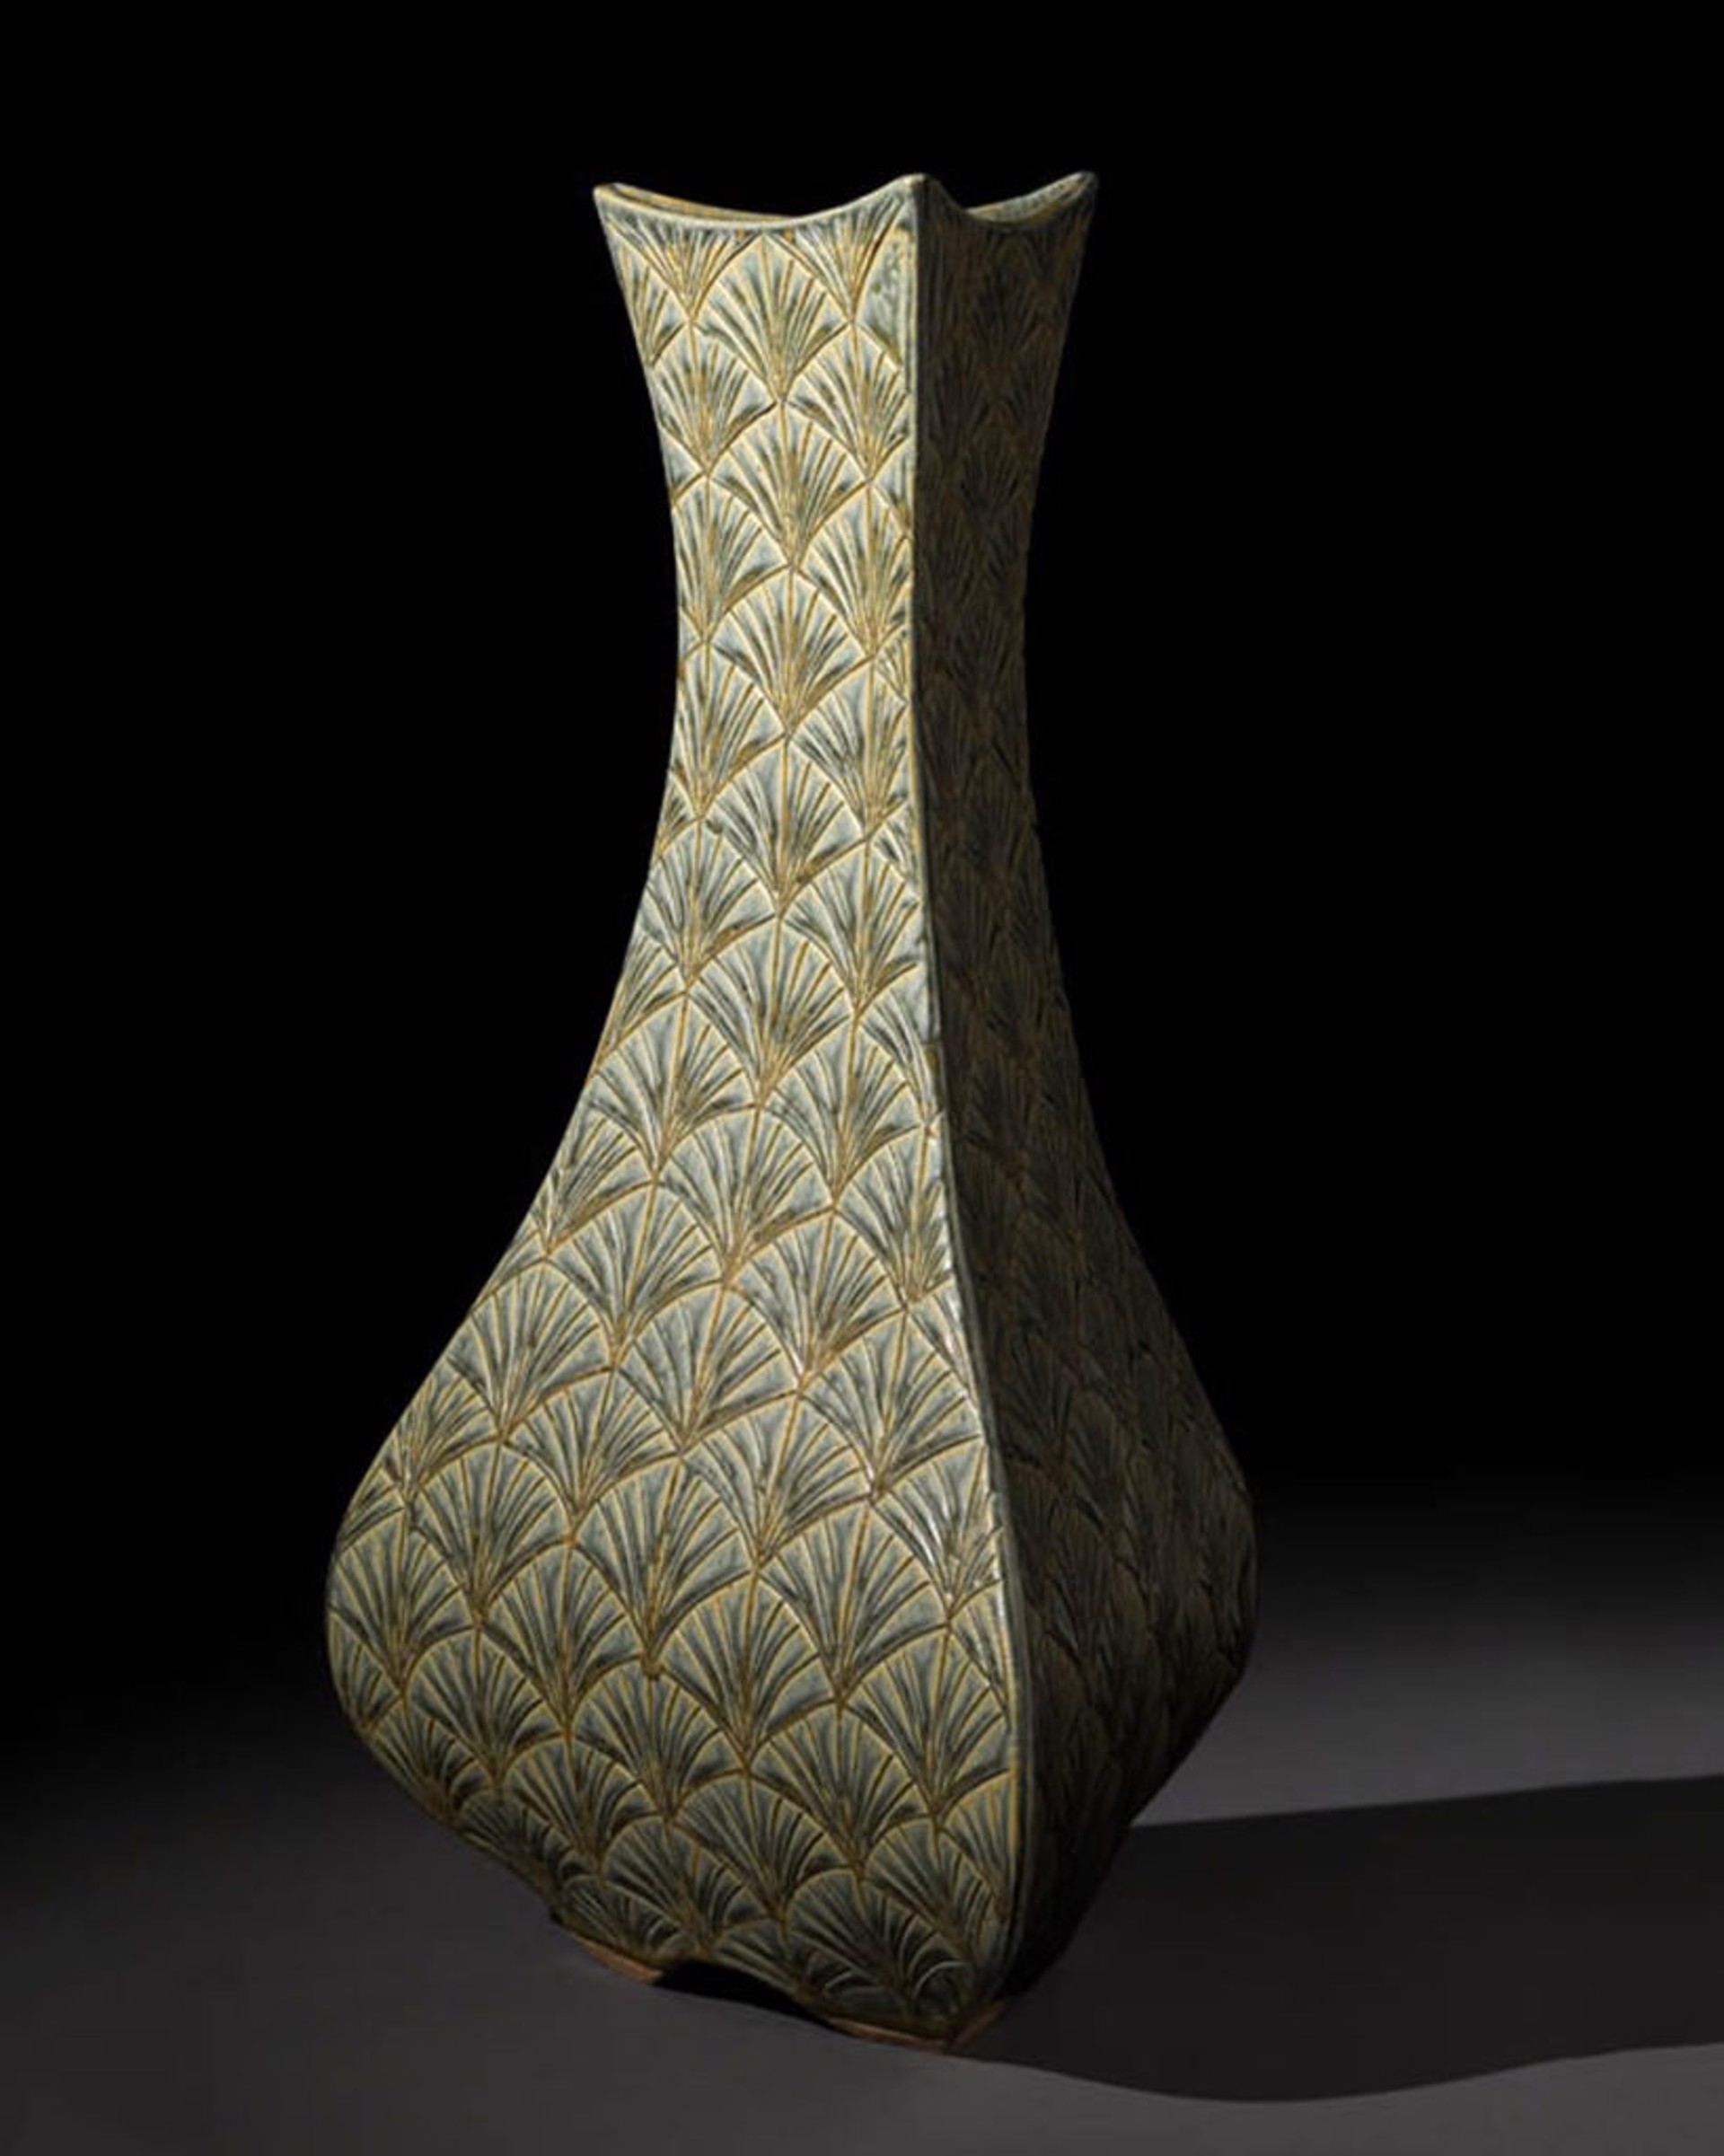 Bulbous Vase with Gingko Carving by Jim & Shirl Parmentier